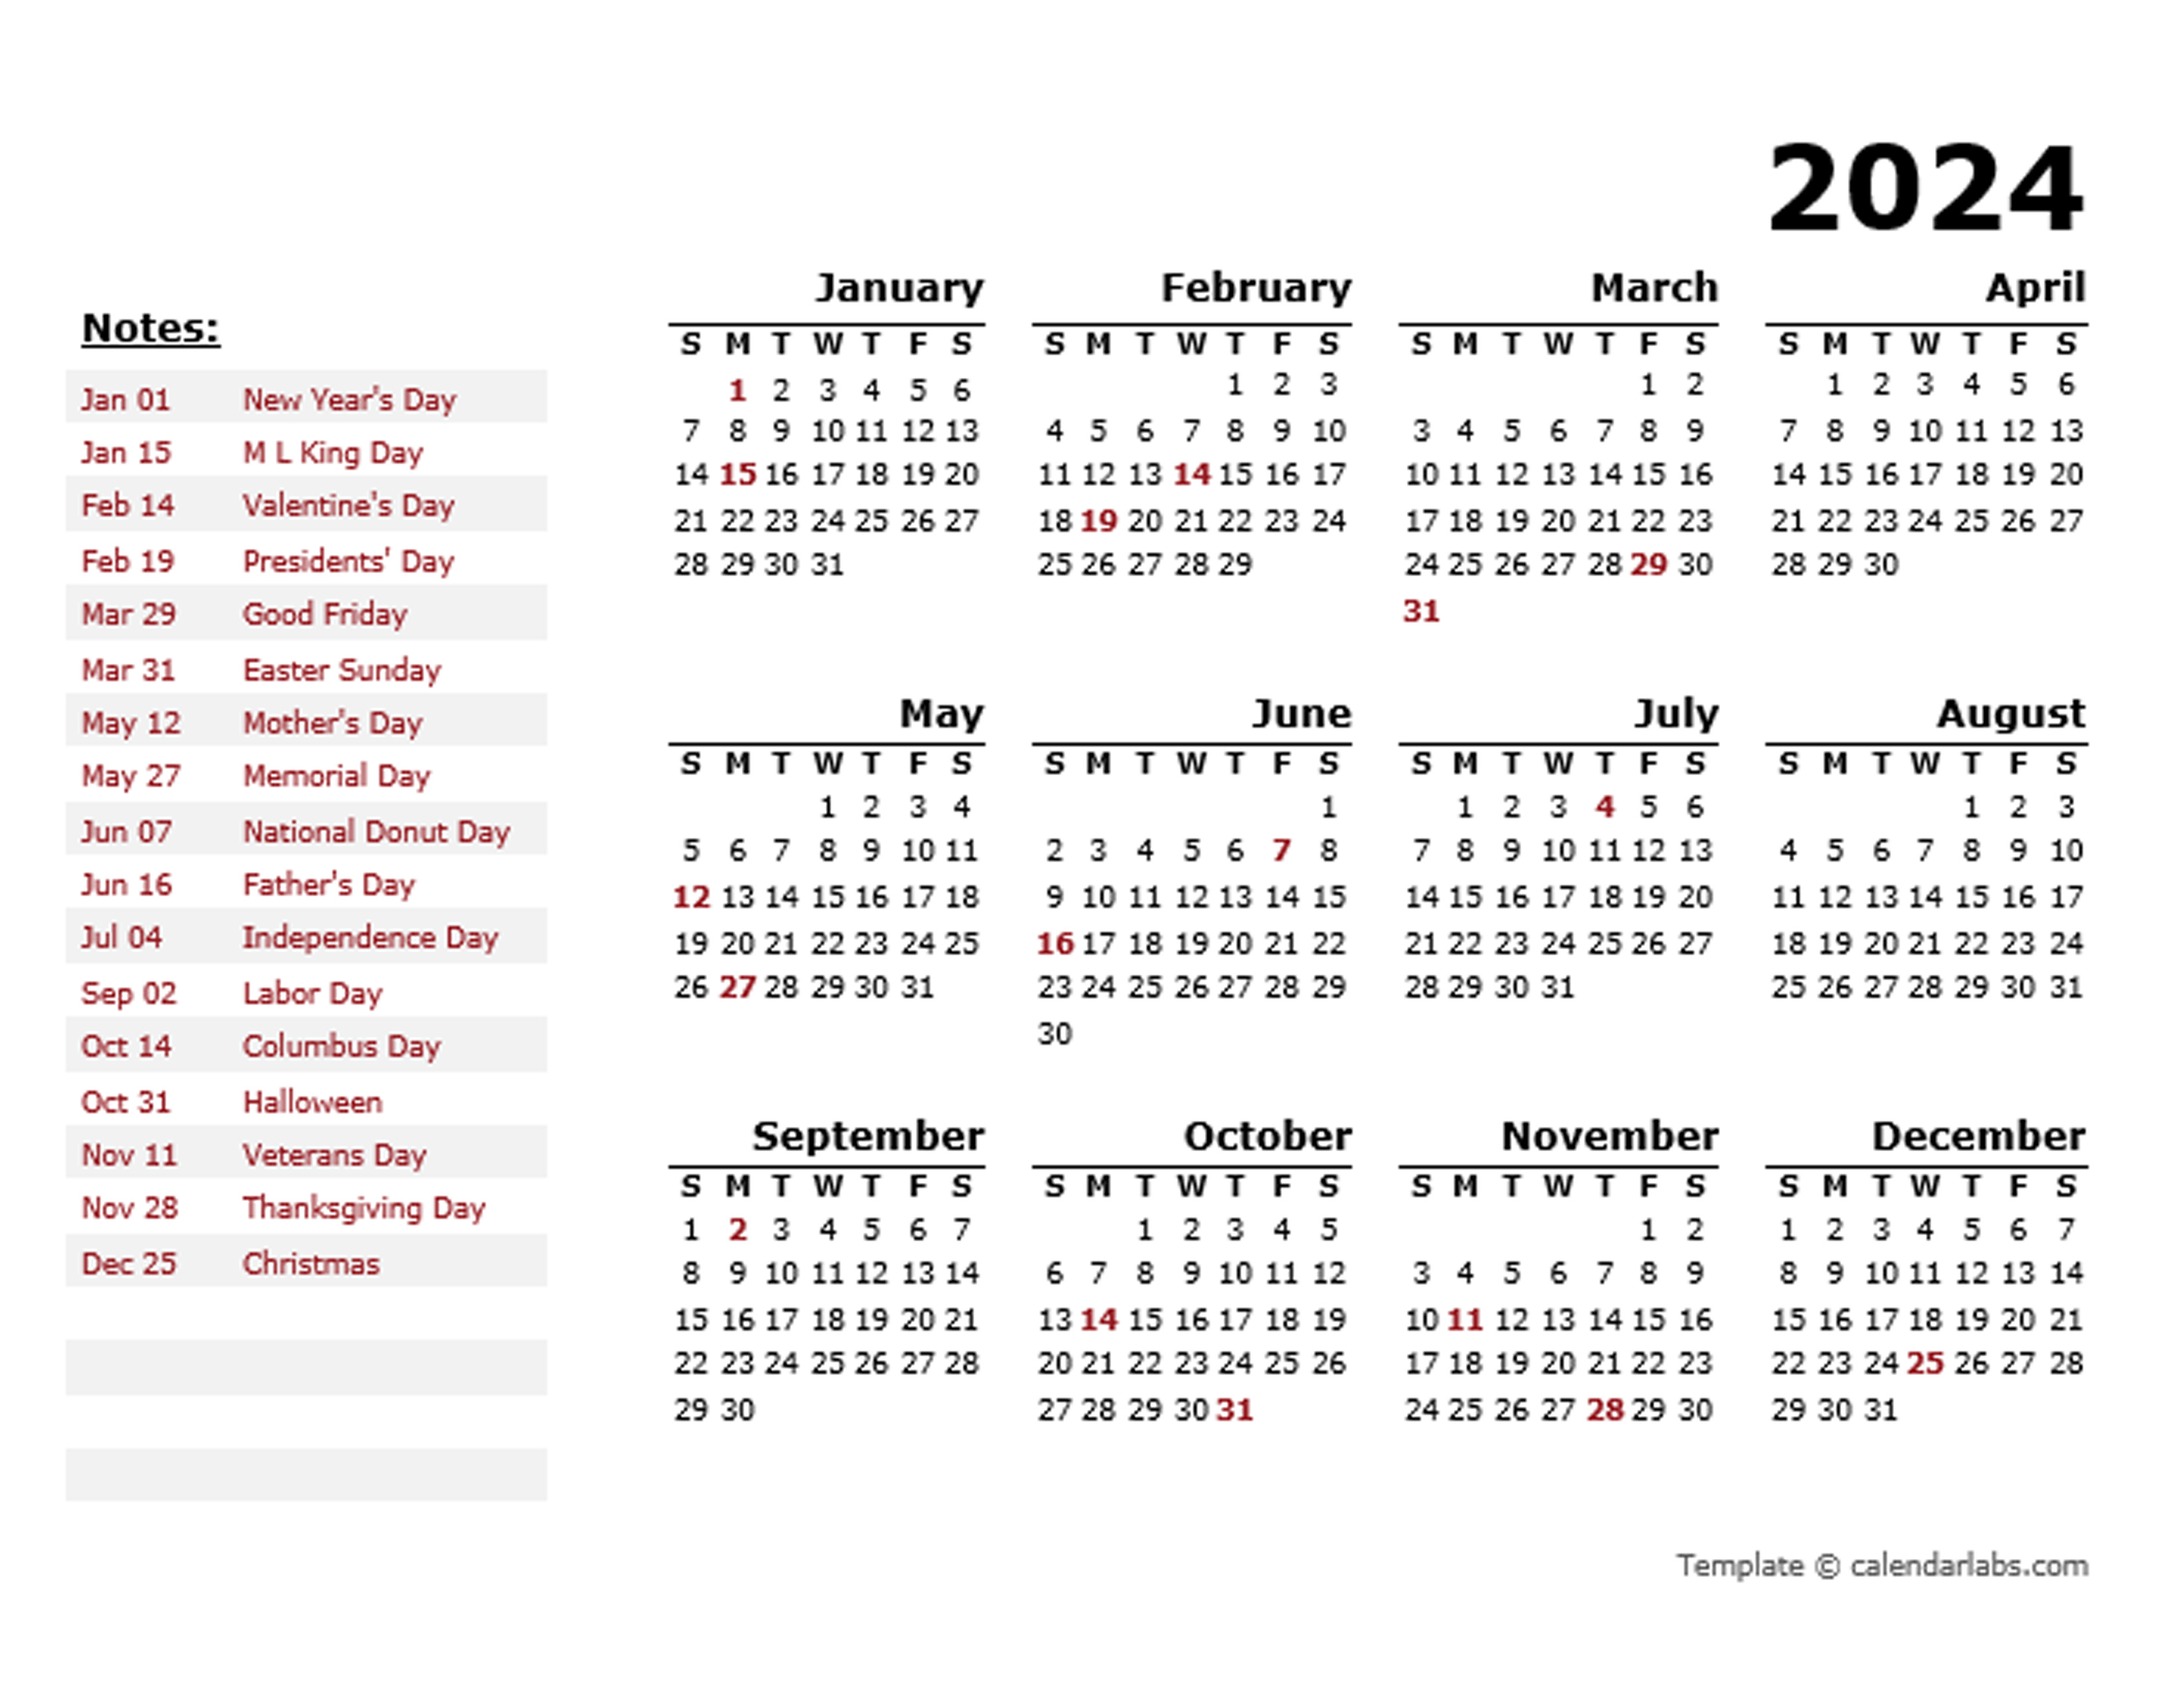 2024 Calendar Word Template A Comprehensive Guide to Creating a Useful